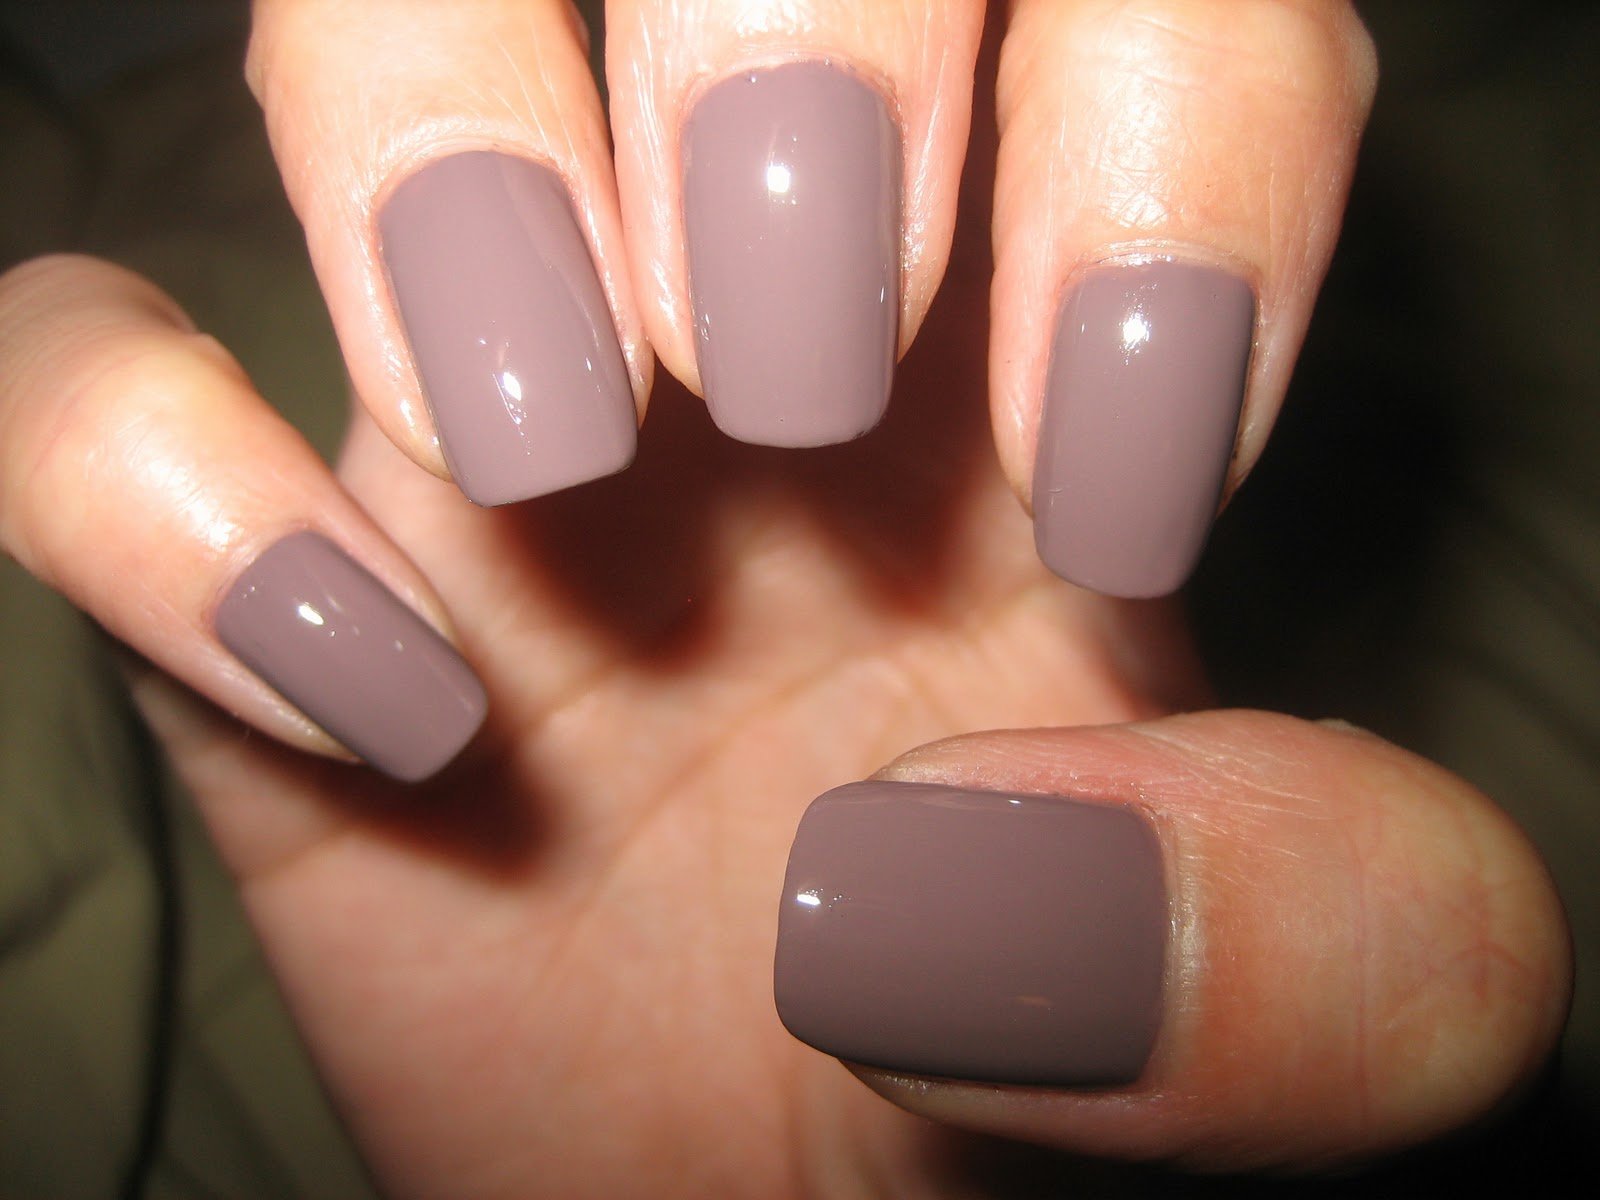 10. "November Nail Colors That Will Complement Your Fall Wardrobe" - wide 7